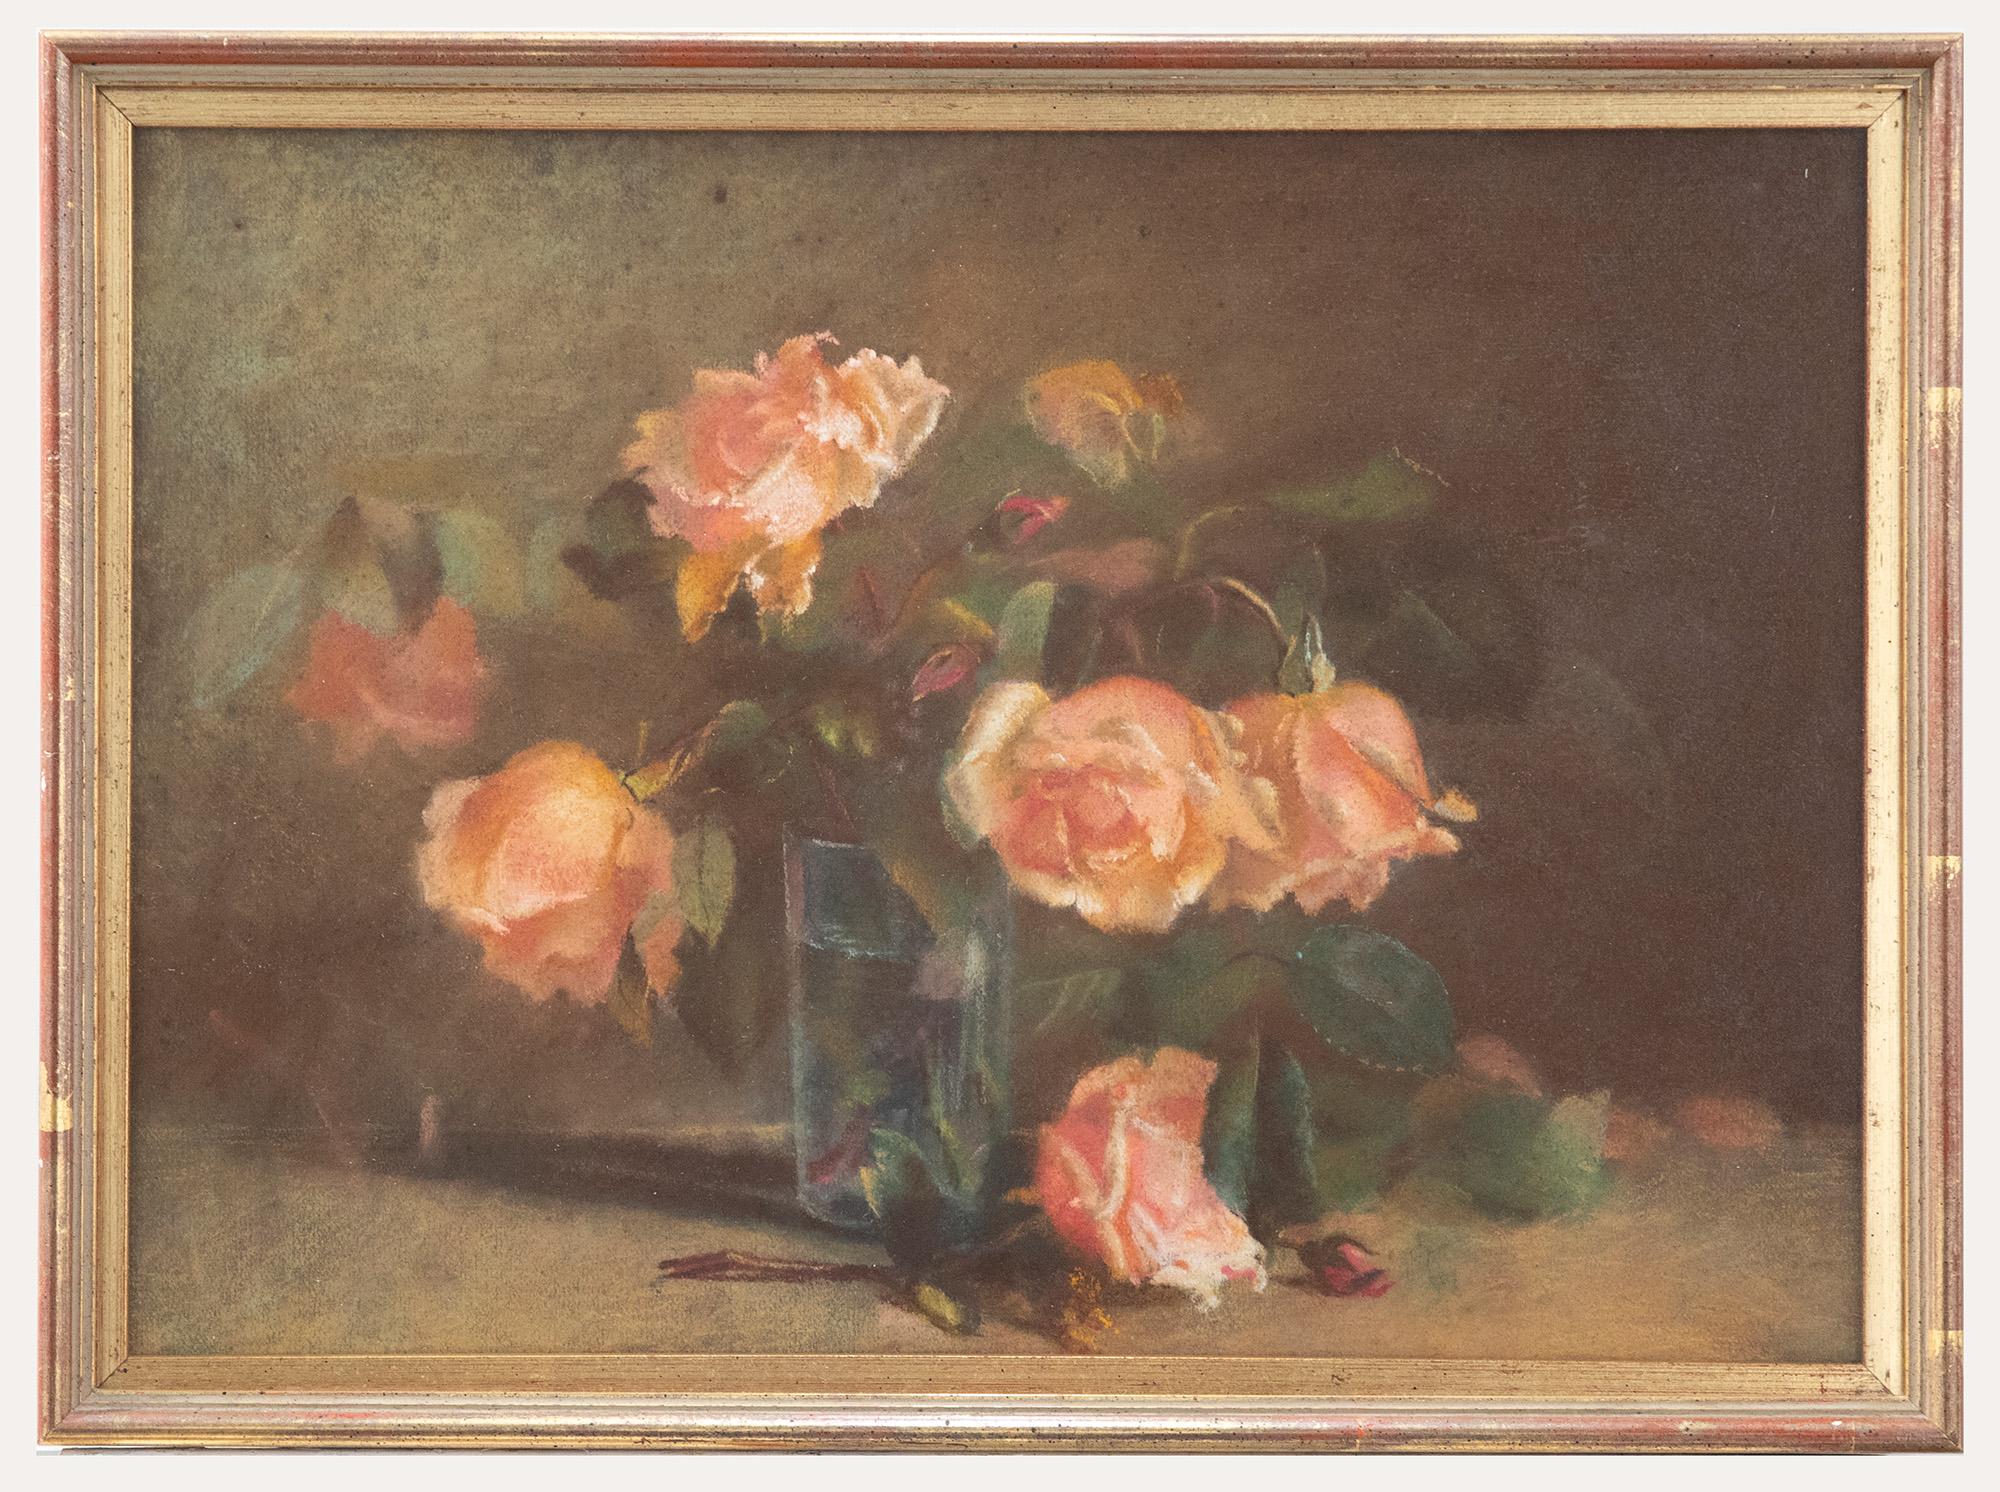 Unknown Still-Life - 20th Century Pastel - Vase of Pink Roses